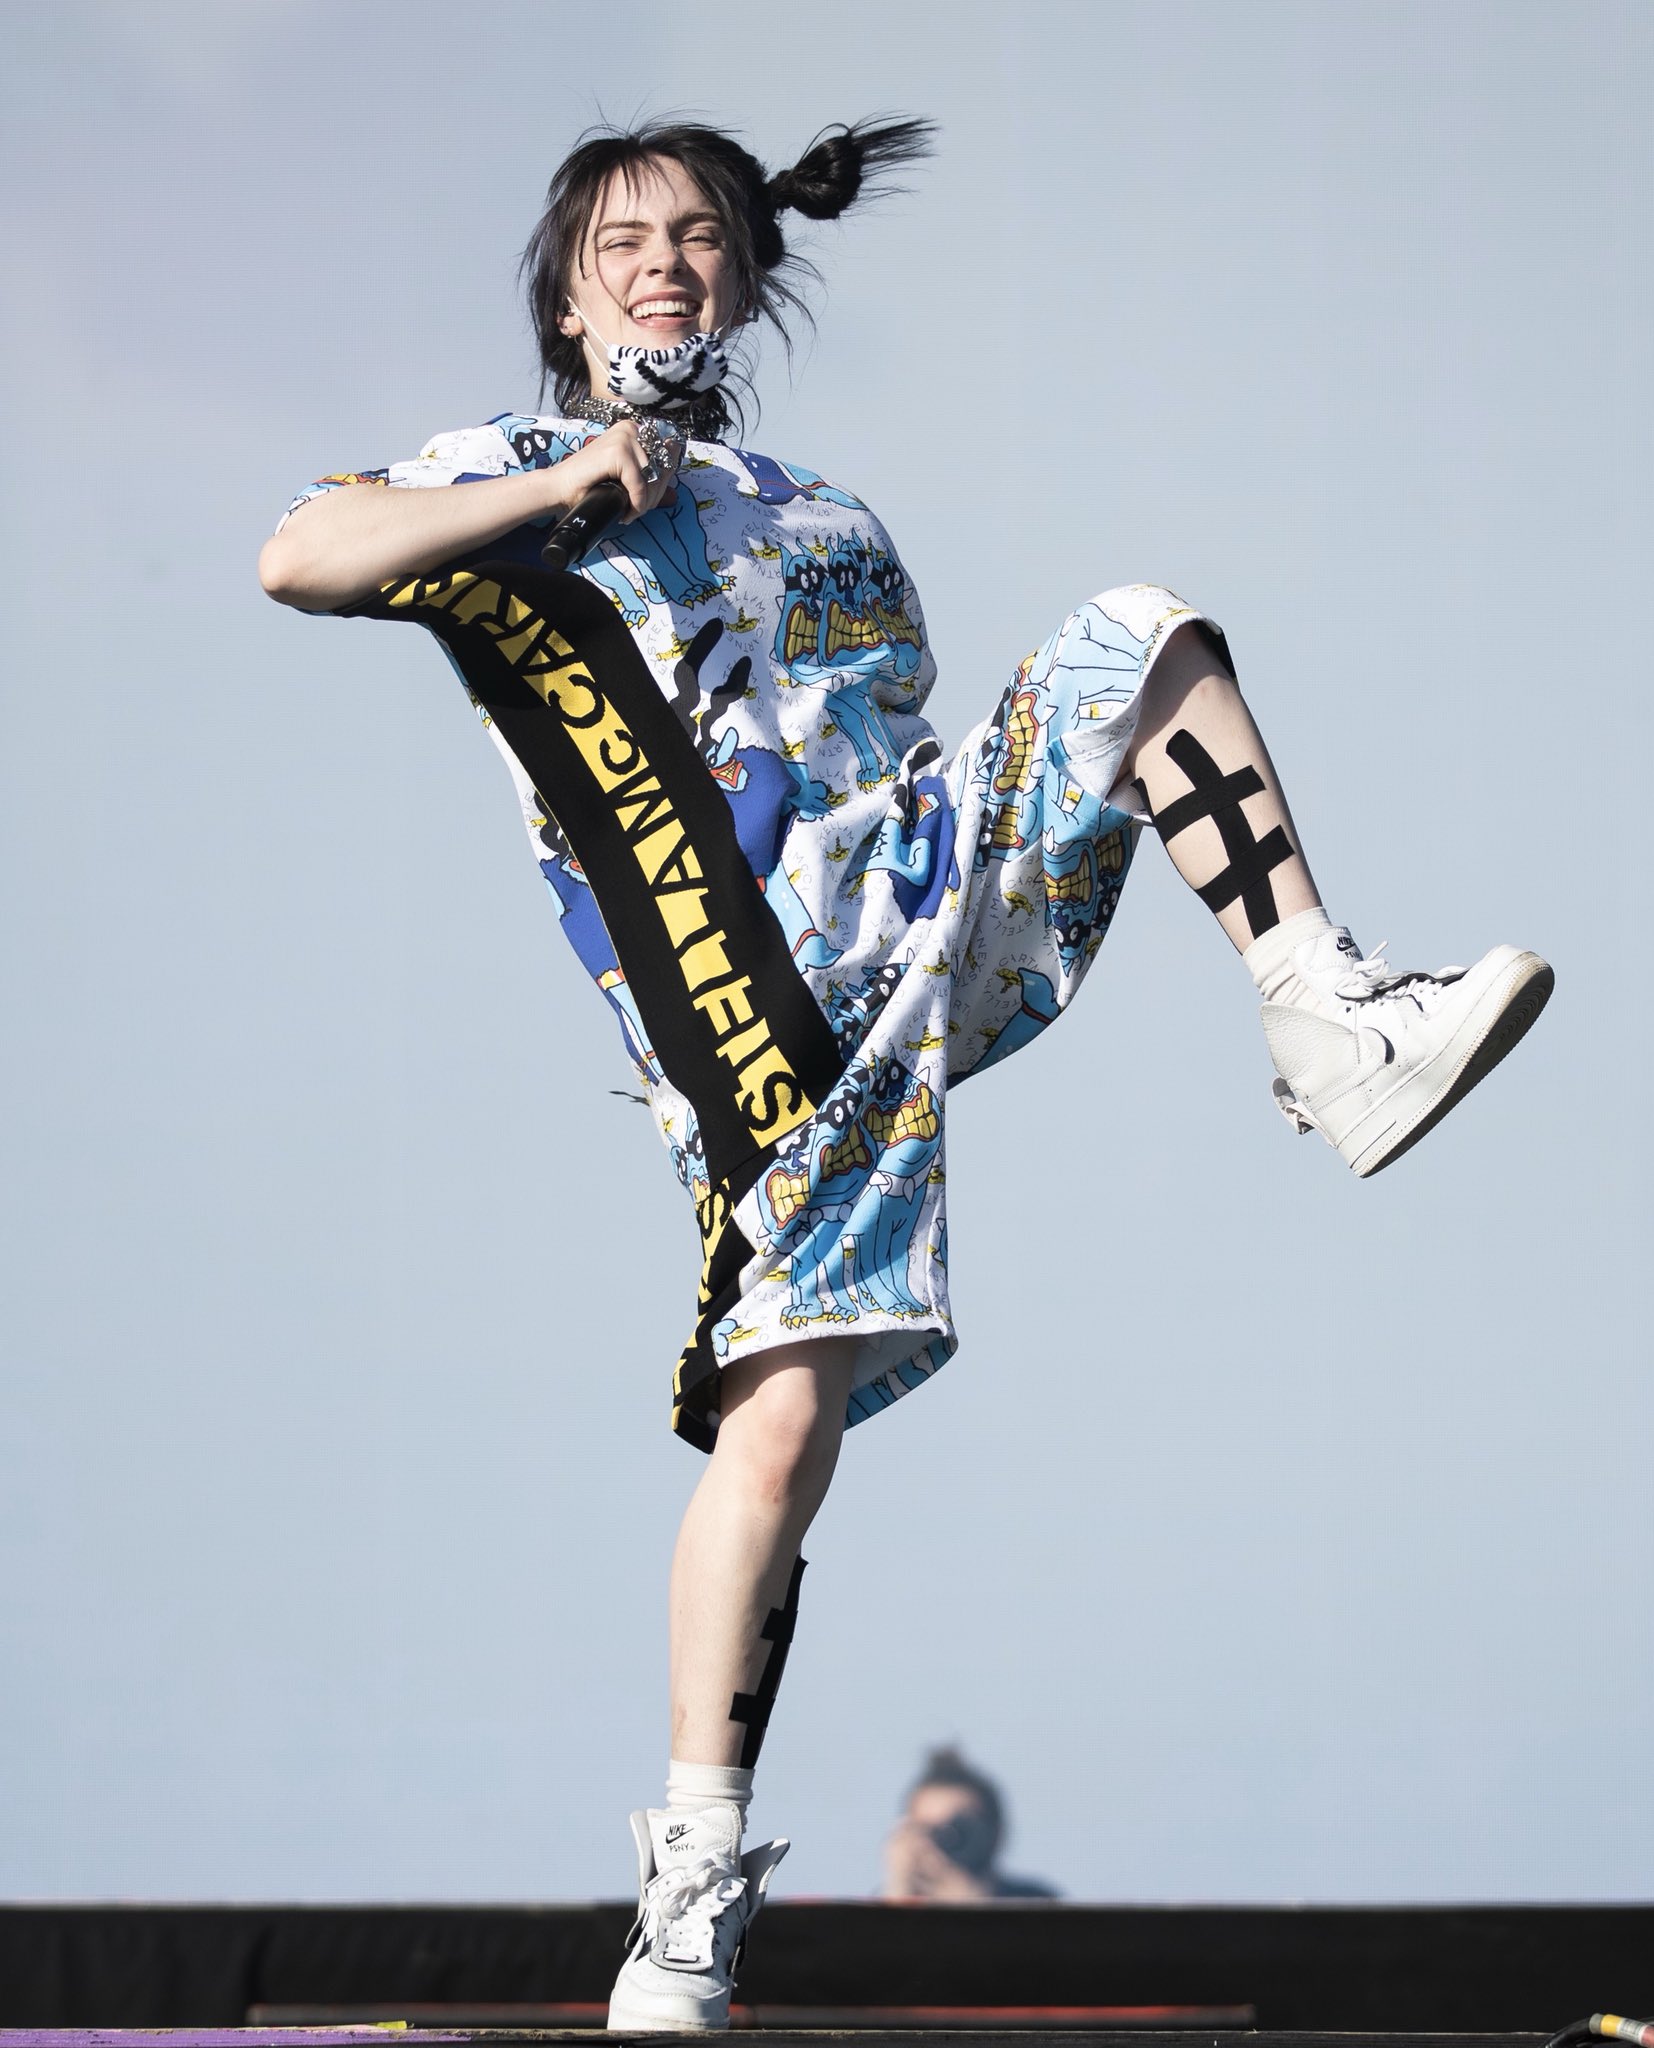 Stella McCartney on Twitter: "Singer @BillieEilish wears custom # StellaMcCartney from the upcoming 'All Together Now' collection for her  first ever Glastonbury performance!â£â£ #StellaMcCartneyxTheBeatlesâ¦  https://t.co/DLlAXQDWcd"